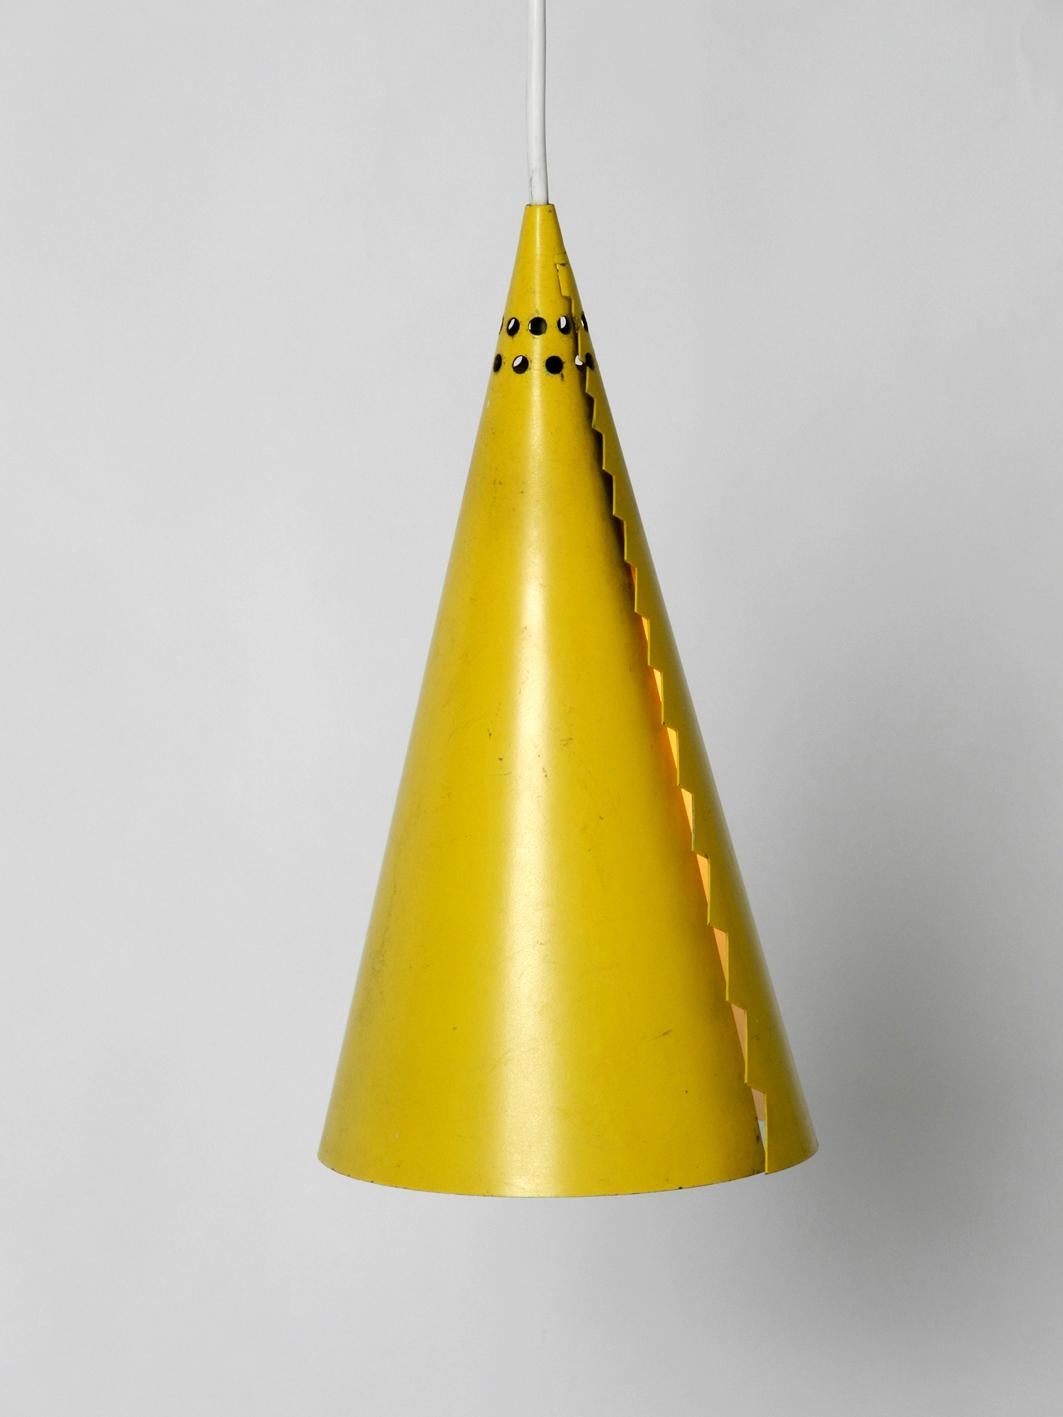 Rare Mid-Century Modern Cone Shaped Pendant Lamp Made of Sheet Steel in Yellow In Good Condition For Sale In München, DE